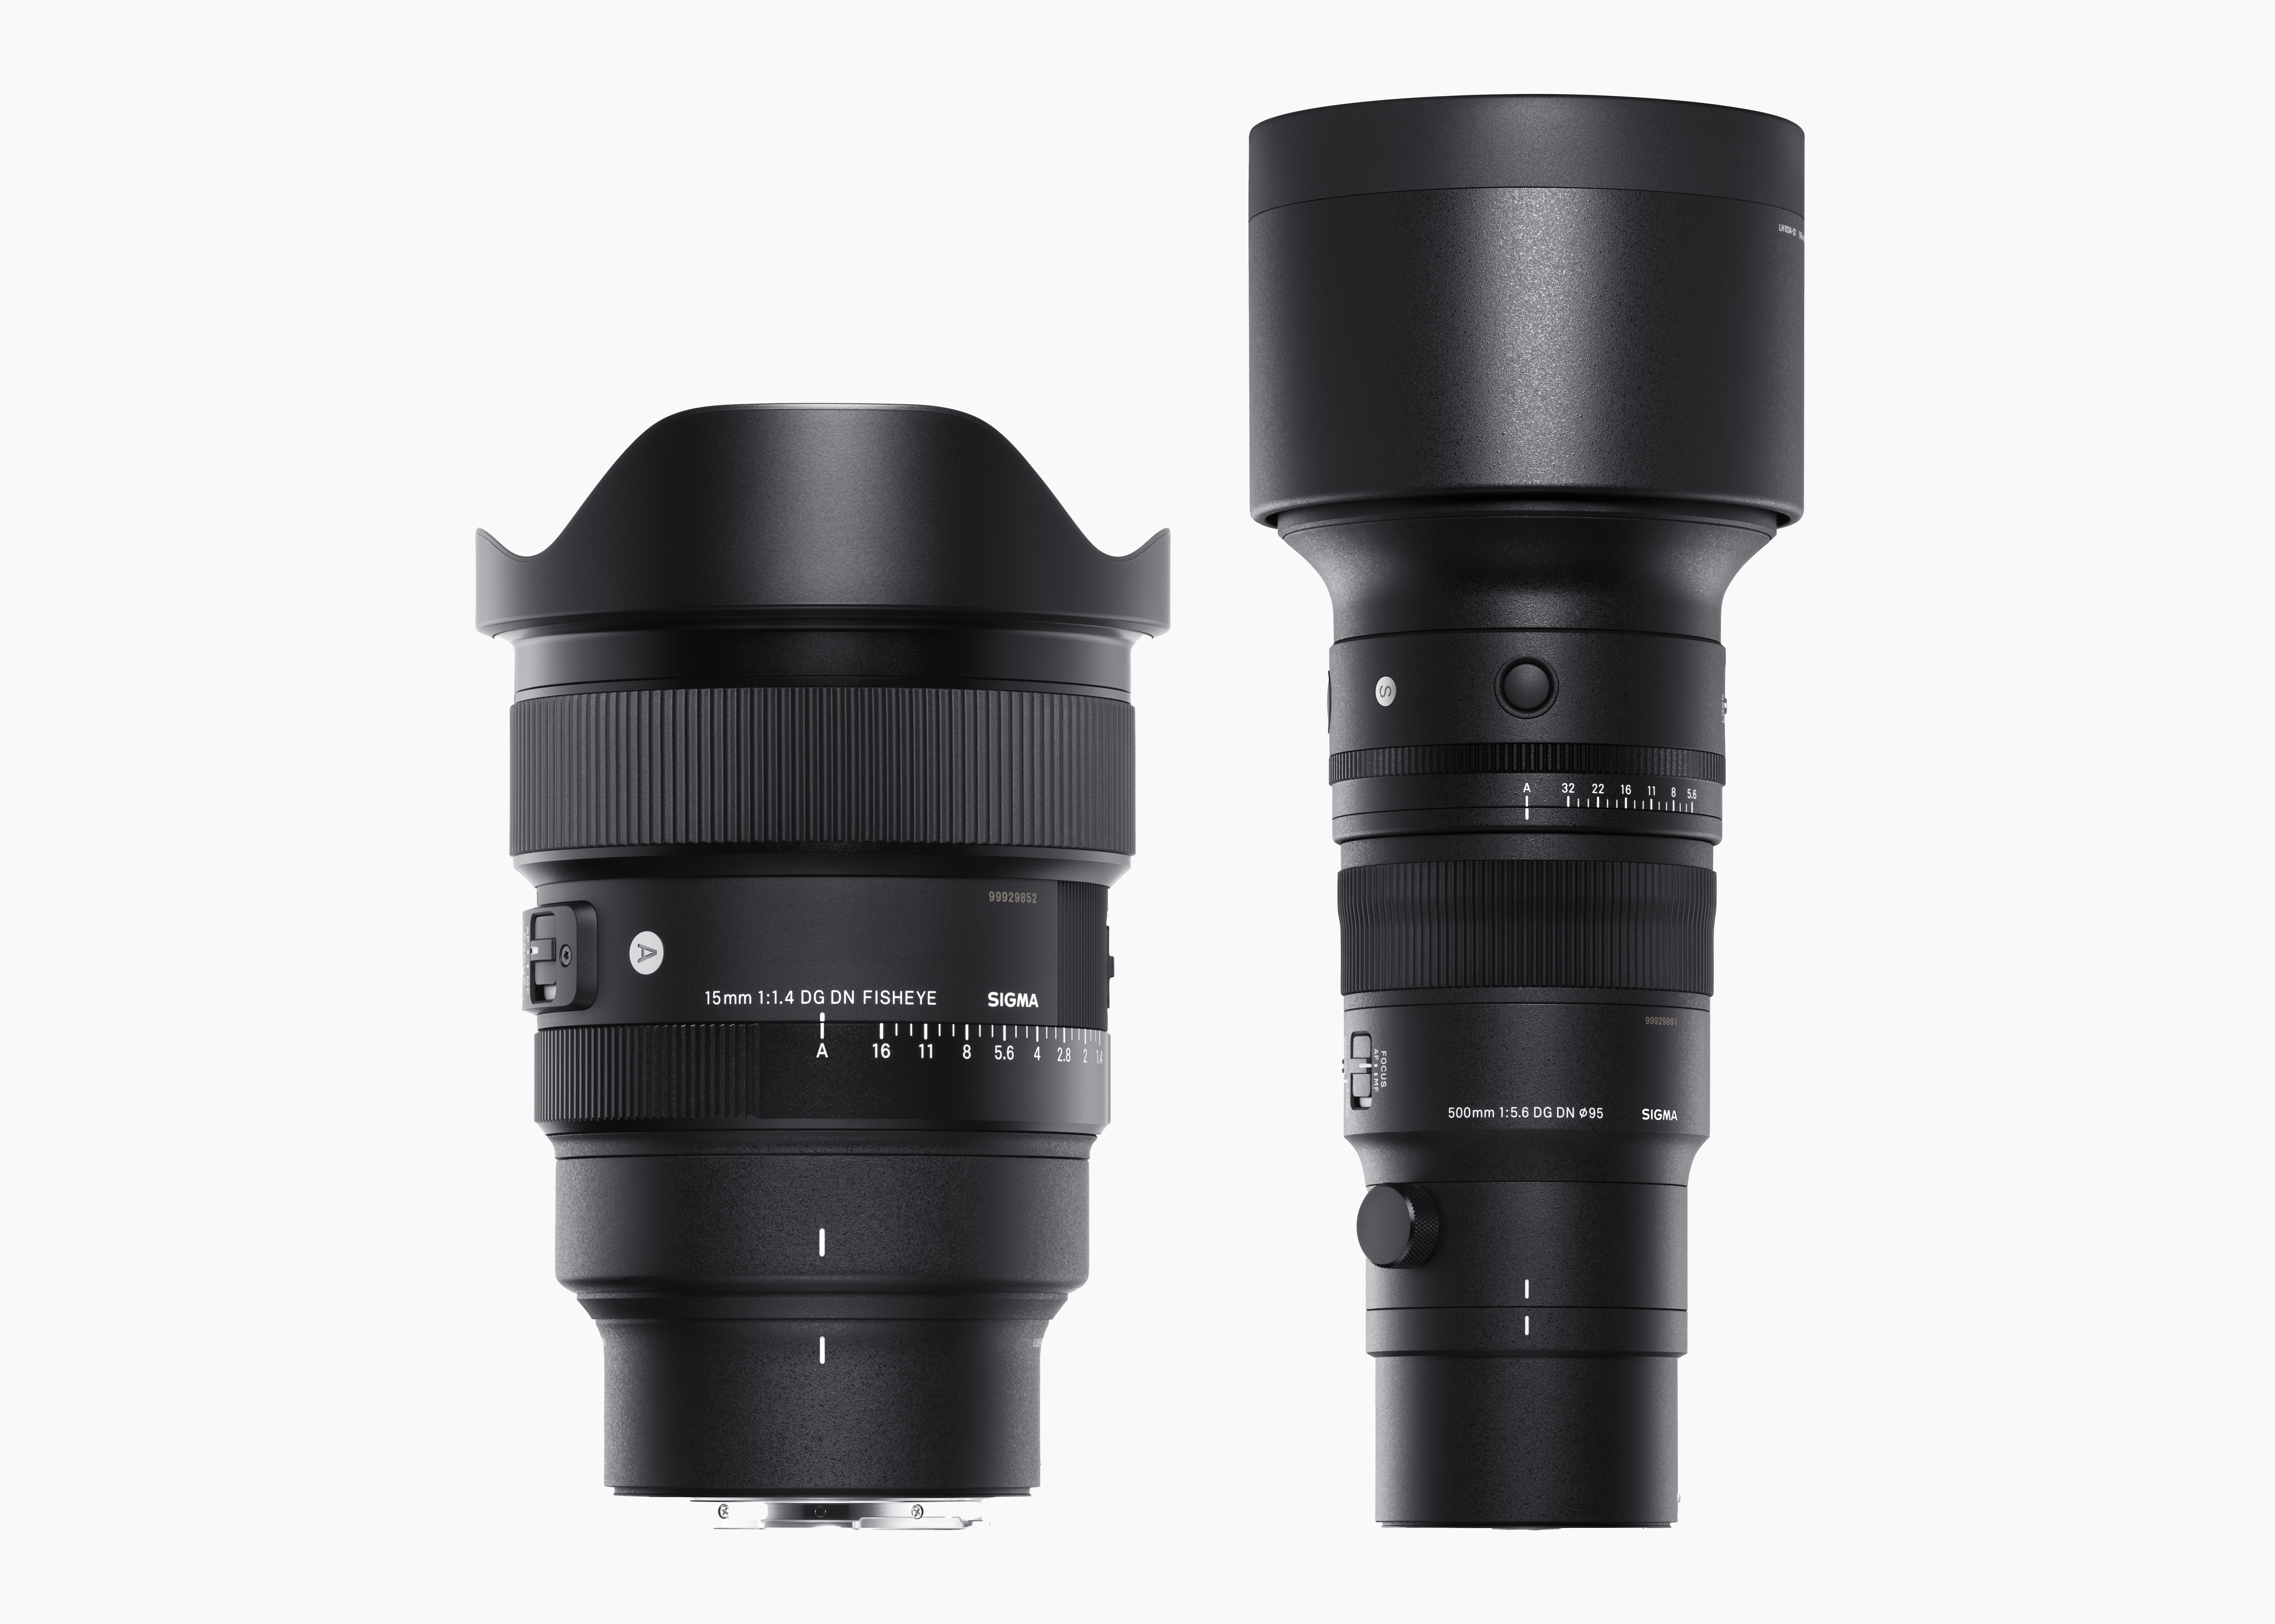 NEW SIGMA 15mm F1.4 DG DN and SIGMA 500mm F5.6 22